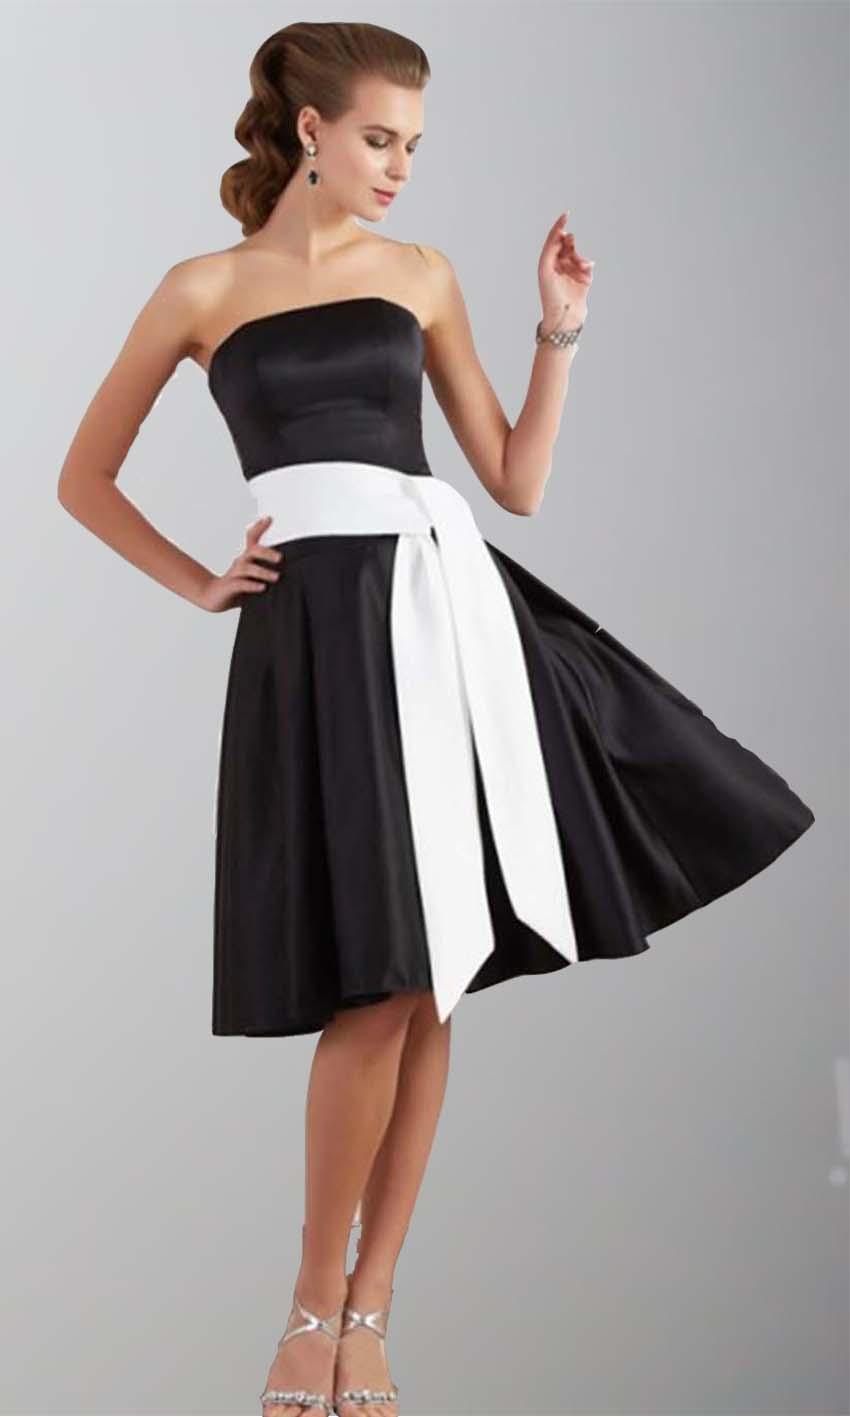 Mariage - Classic Black Strapless Short Bridesmaid Dresses KSP342 [KSP342] - £76.00 : Cheap Prom Dresses Uk, Bridesmaid Dresses, 2014 Prom & Evening Dresses, Look for cheap elegant prom dresses 2014, cocktail gowns, or dresses for special occasions? kissprom.co.uk 